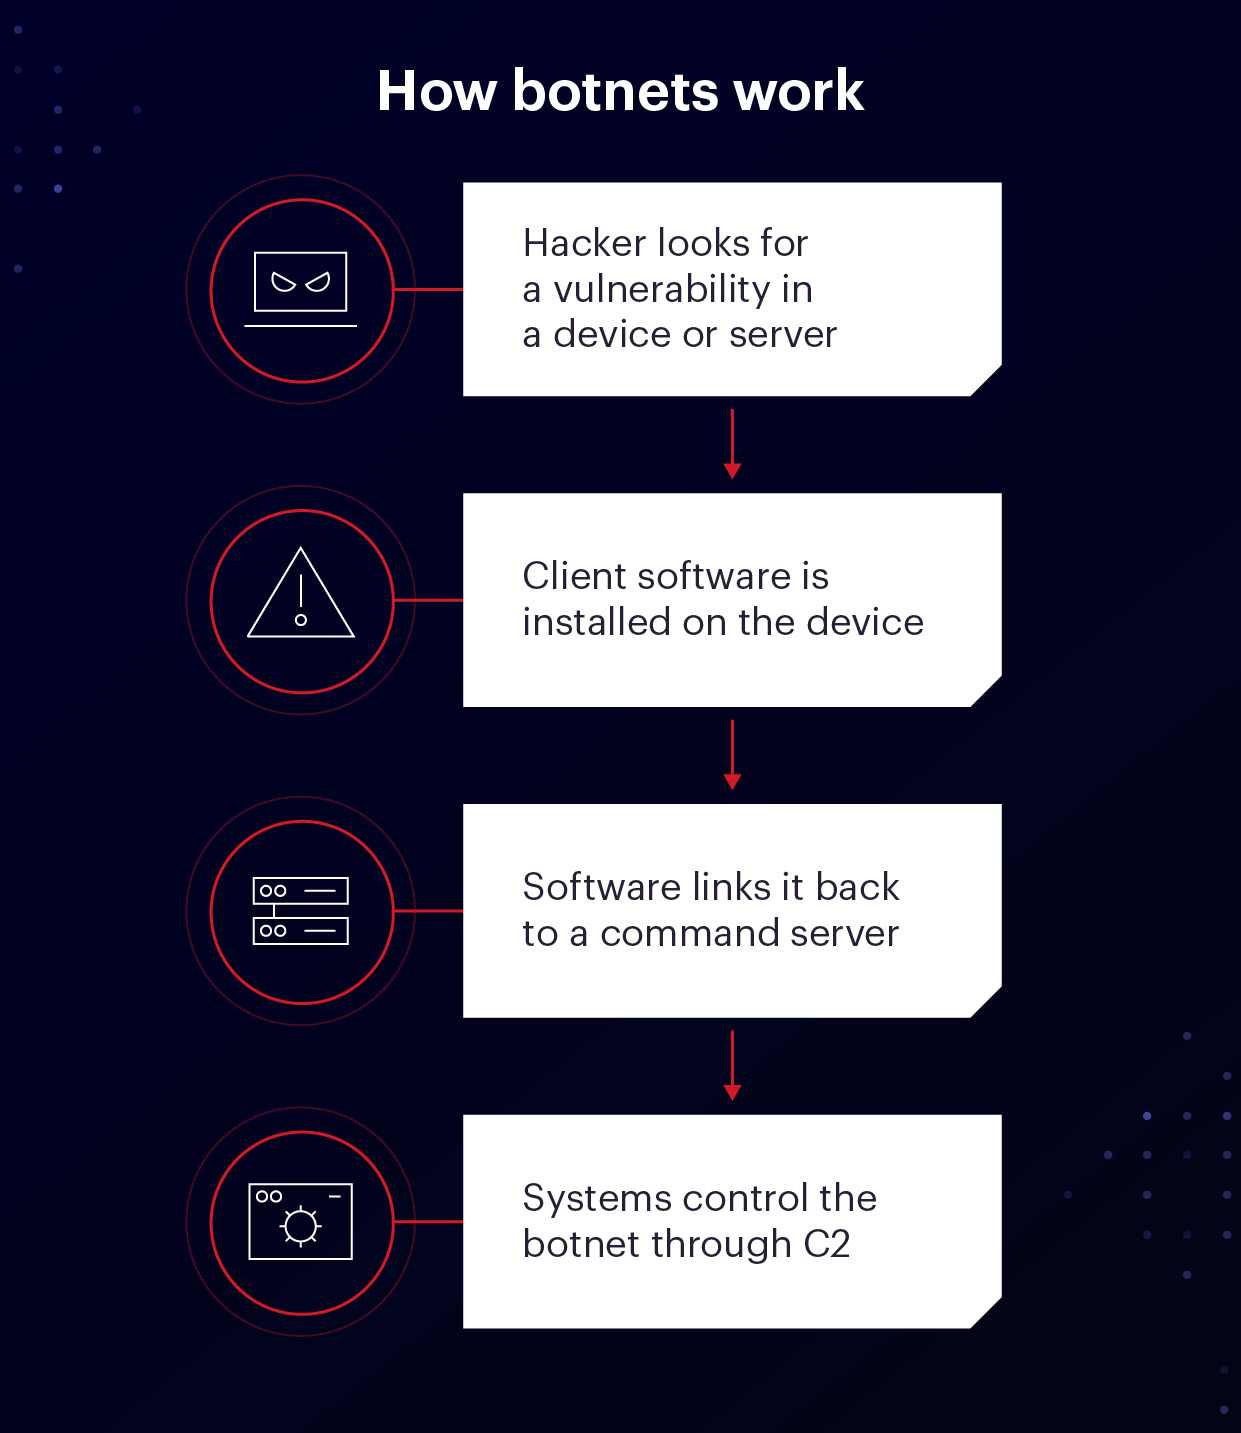 How botnets work: First a hacker looks for vulnerabilities, then client software is installed on the device. Next, software links it back to a command server. Finally, systems control the botnet through C2.